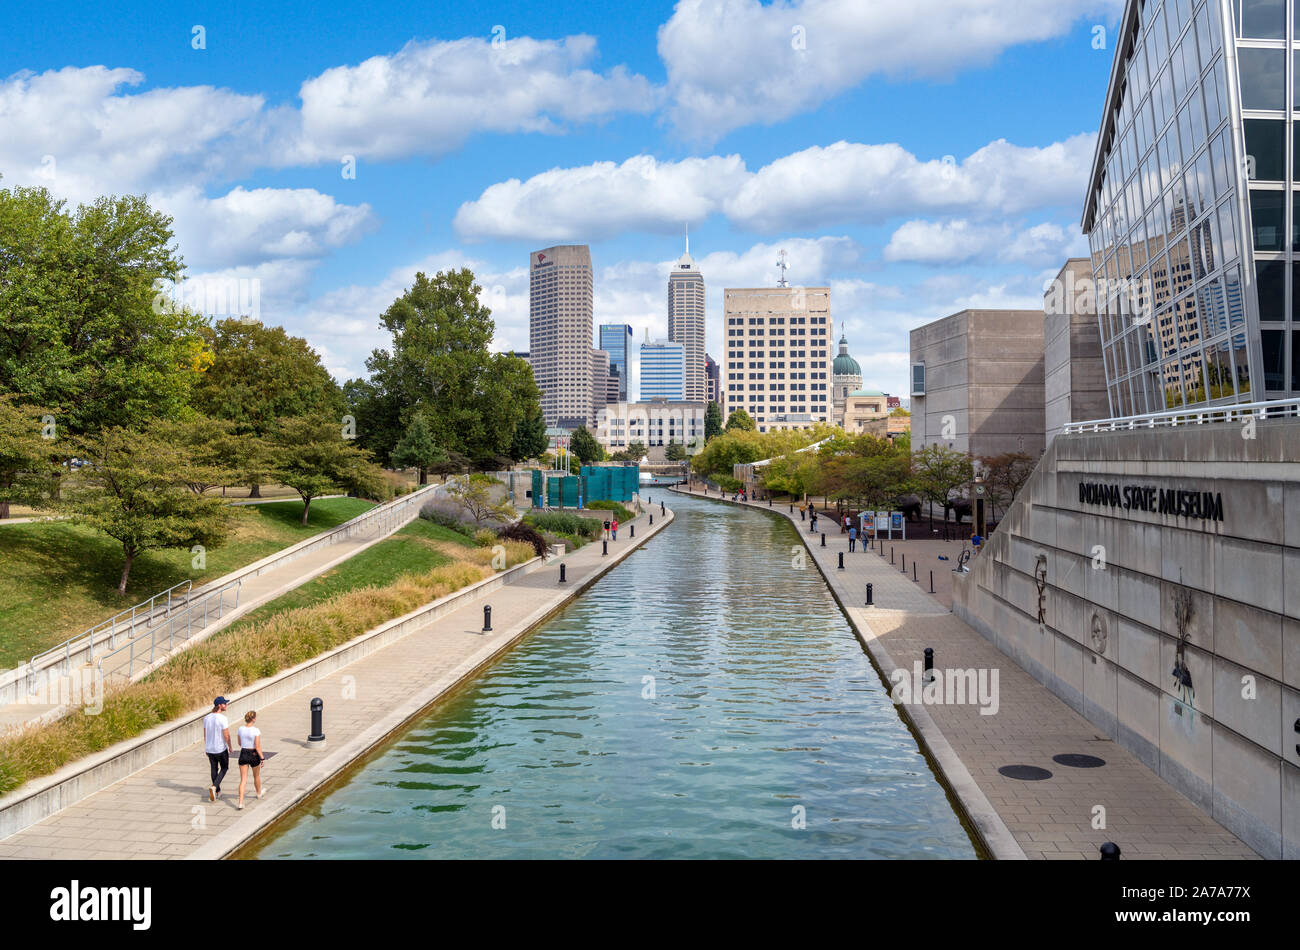 The downtown skyline and canal walk from the Canal District, Indianapolis, Indiana, USA. The Indiana State Museum is to the right. Stock Photo